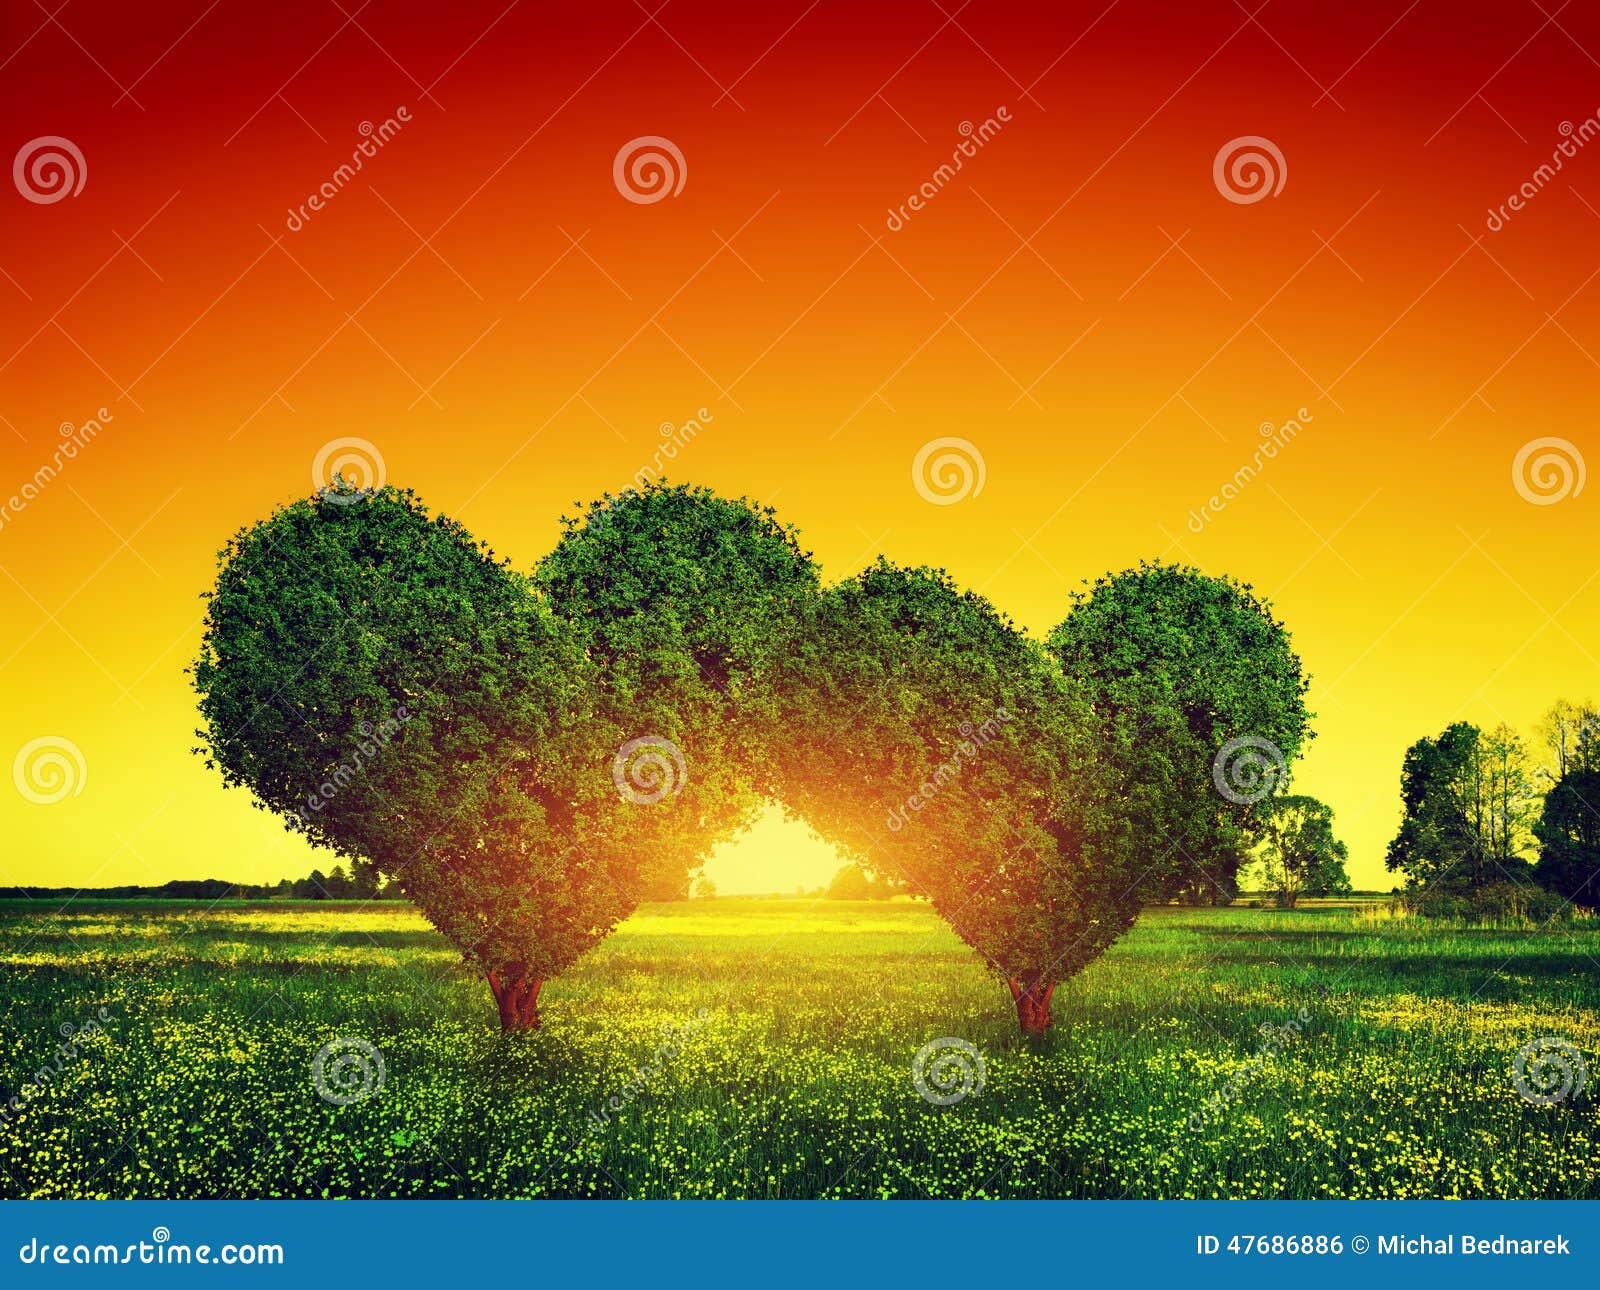 heart  trees couple on grass at sunset. love